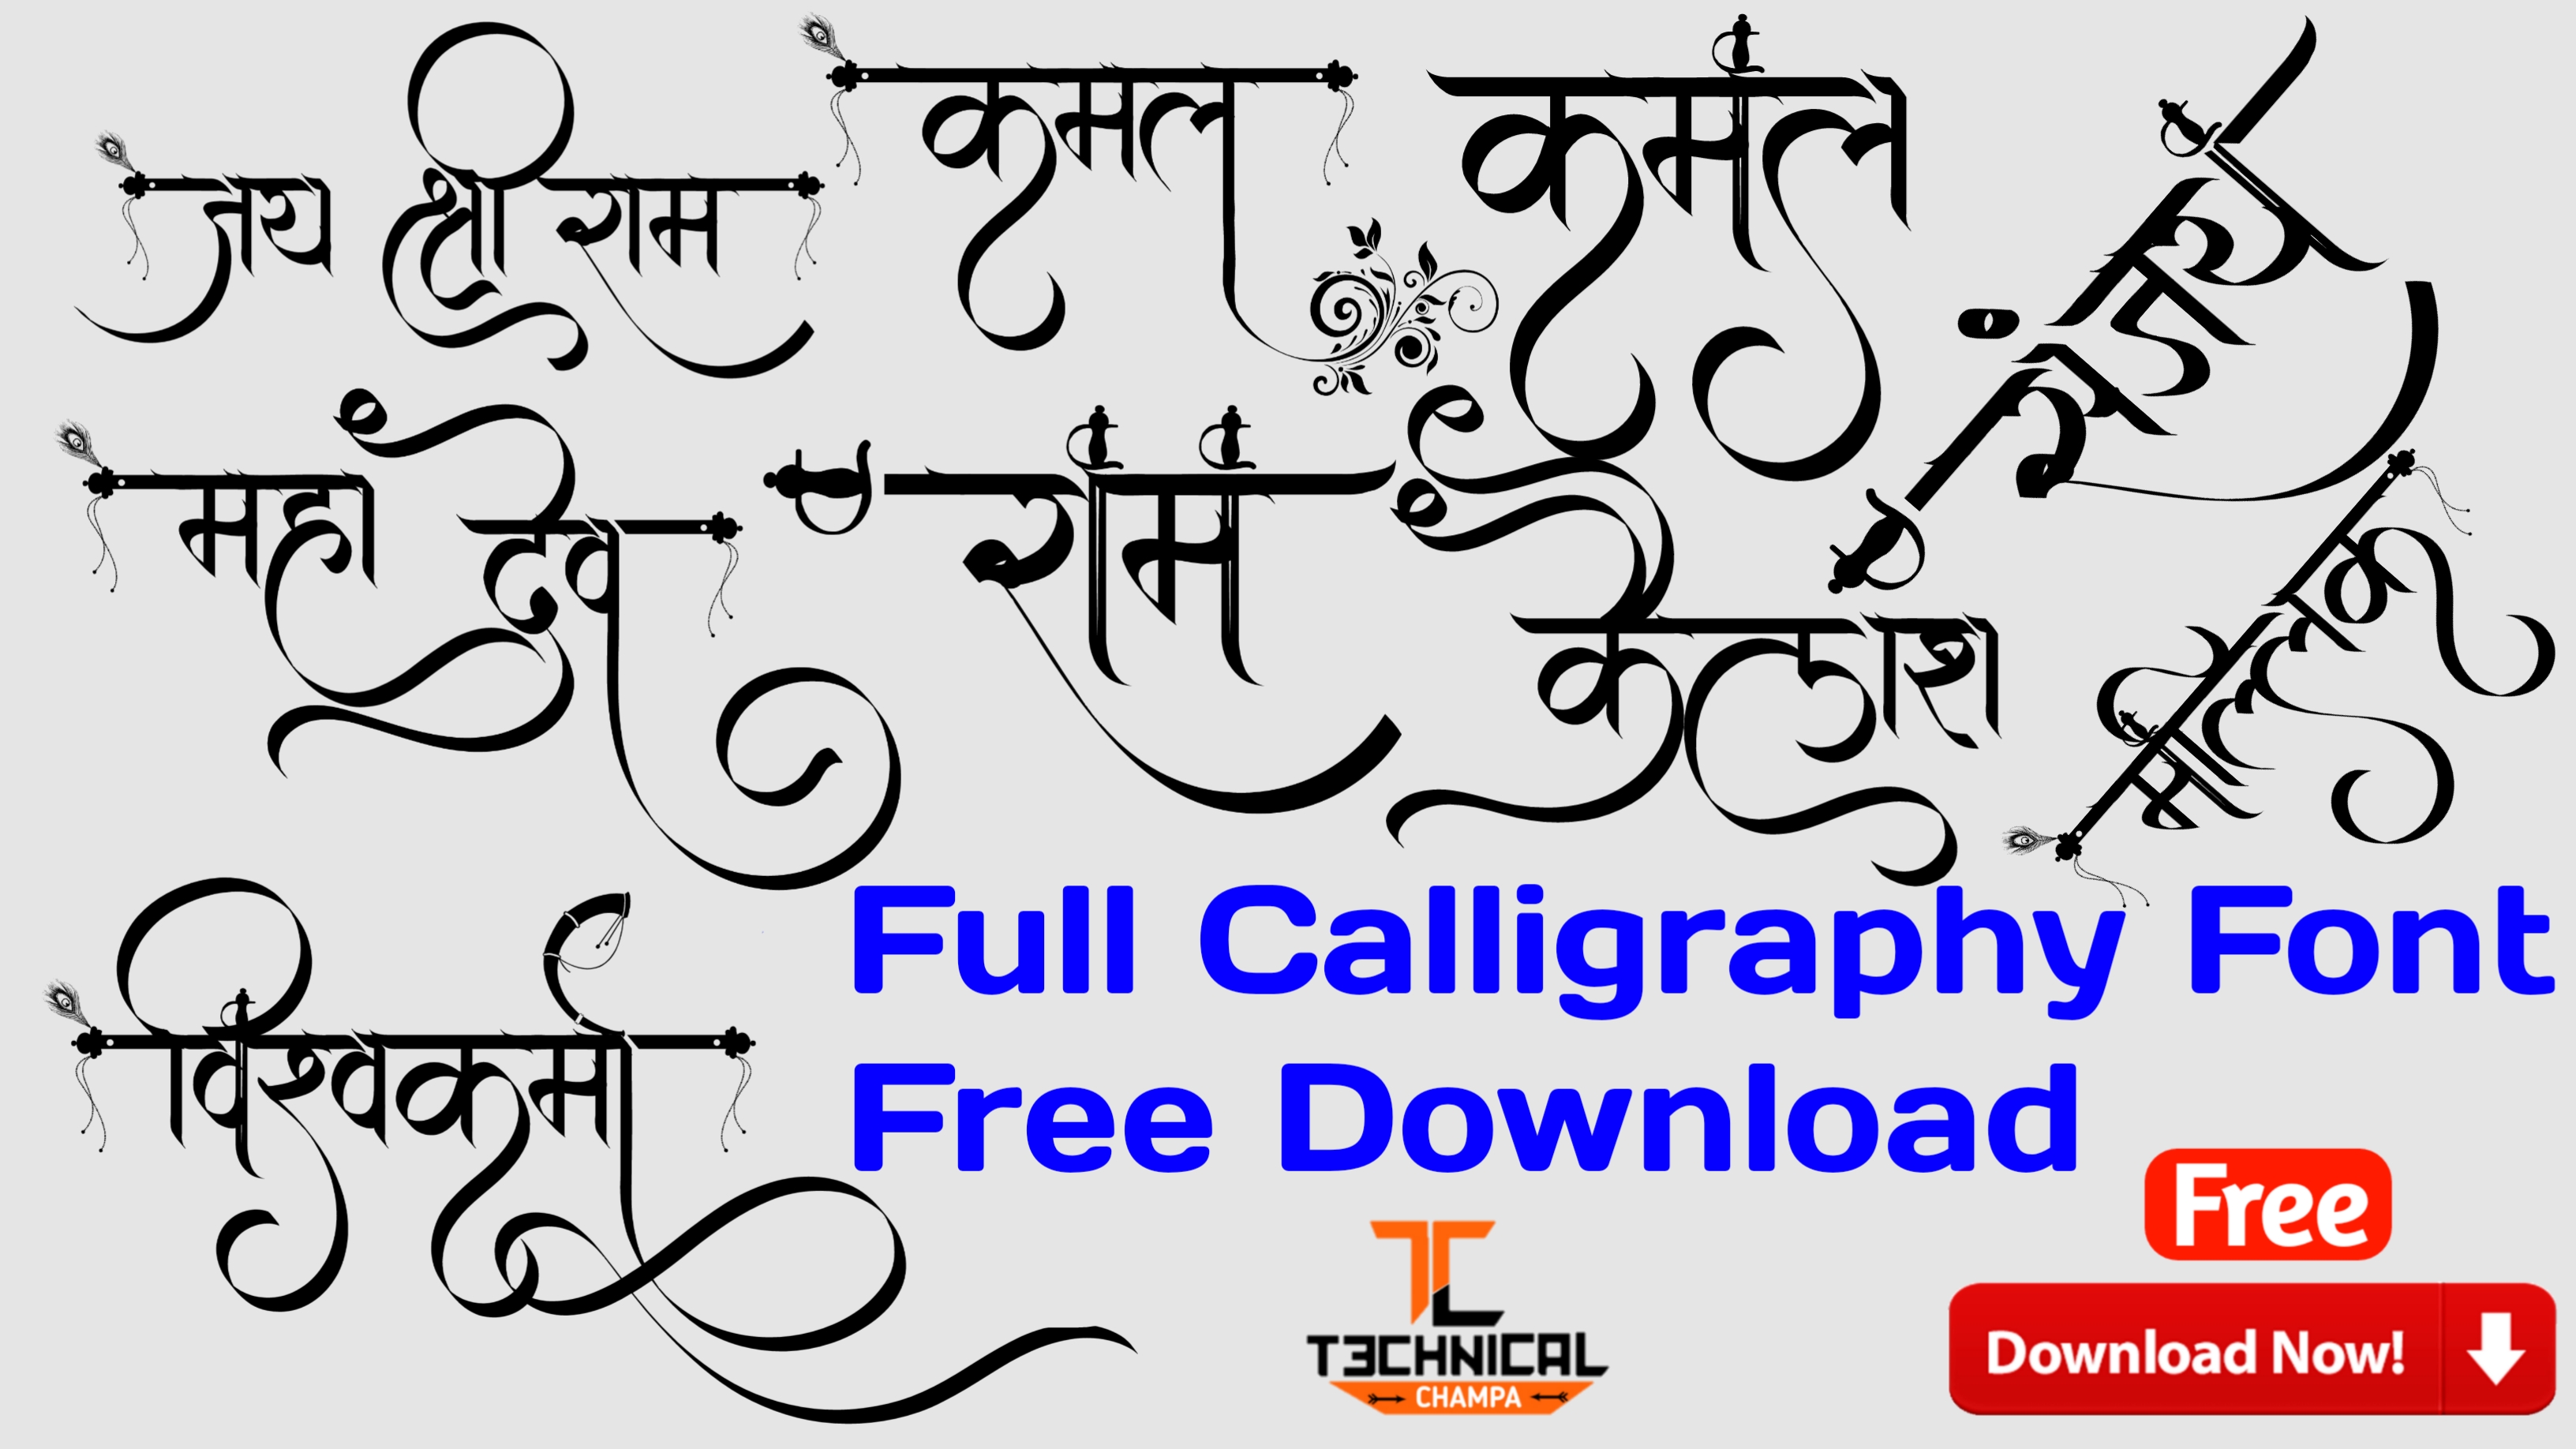 Full Calligraphy Font Free Download Technical Champa